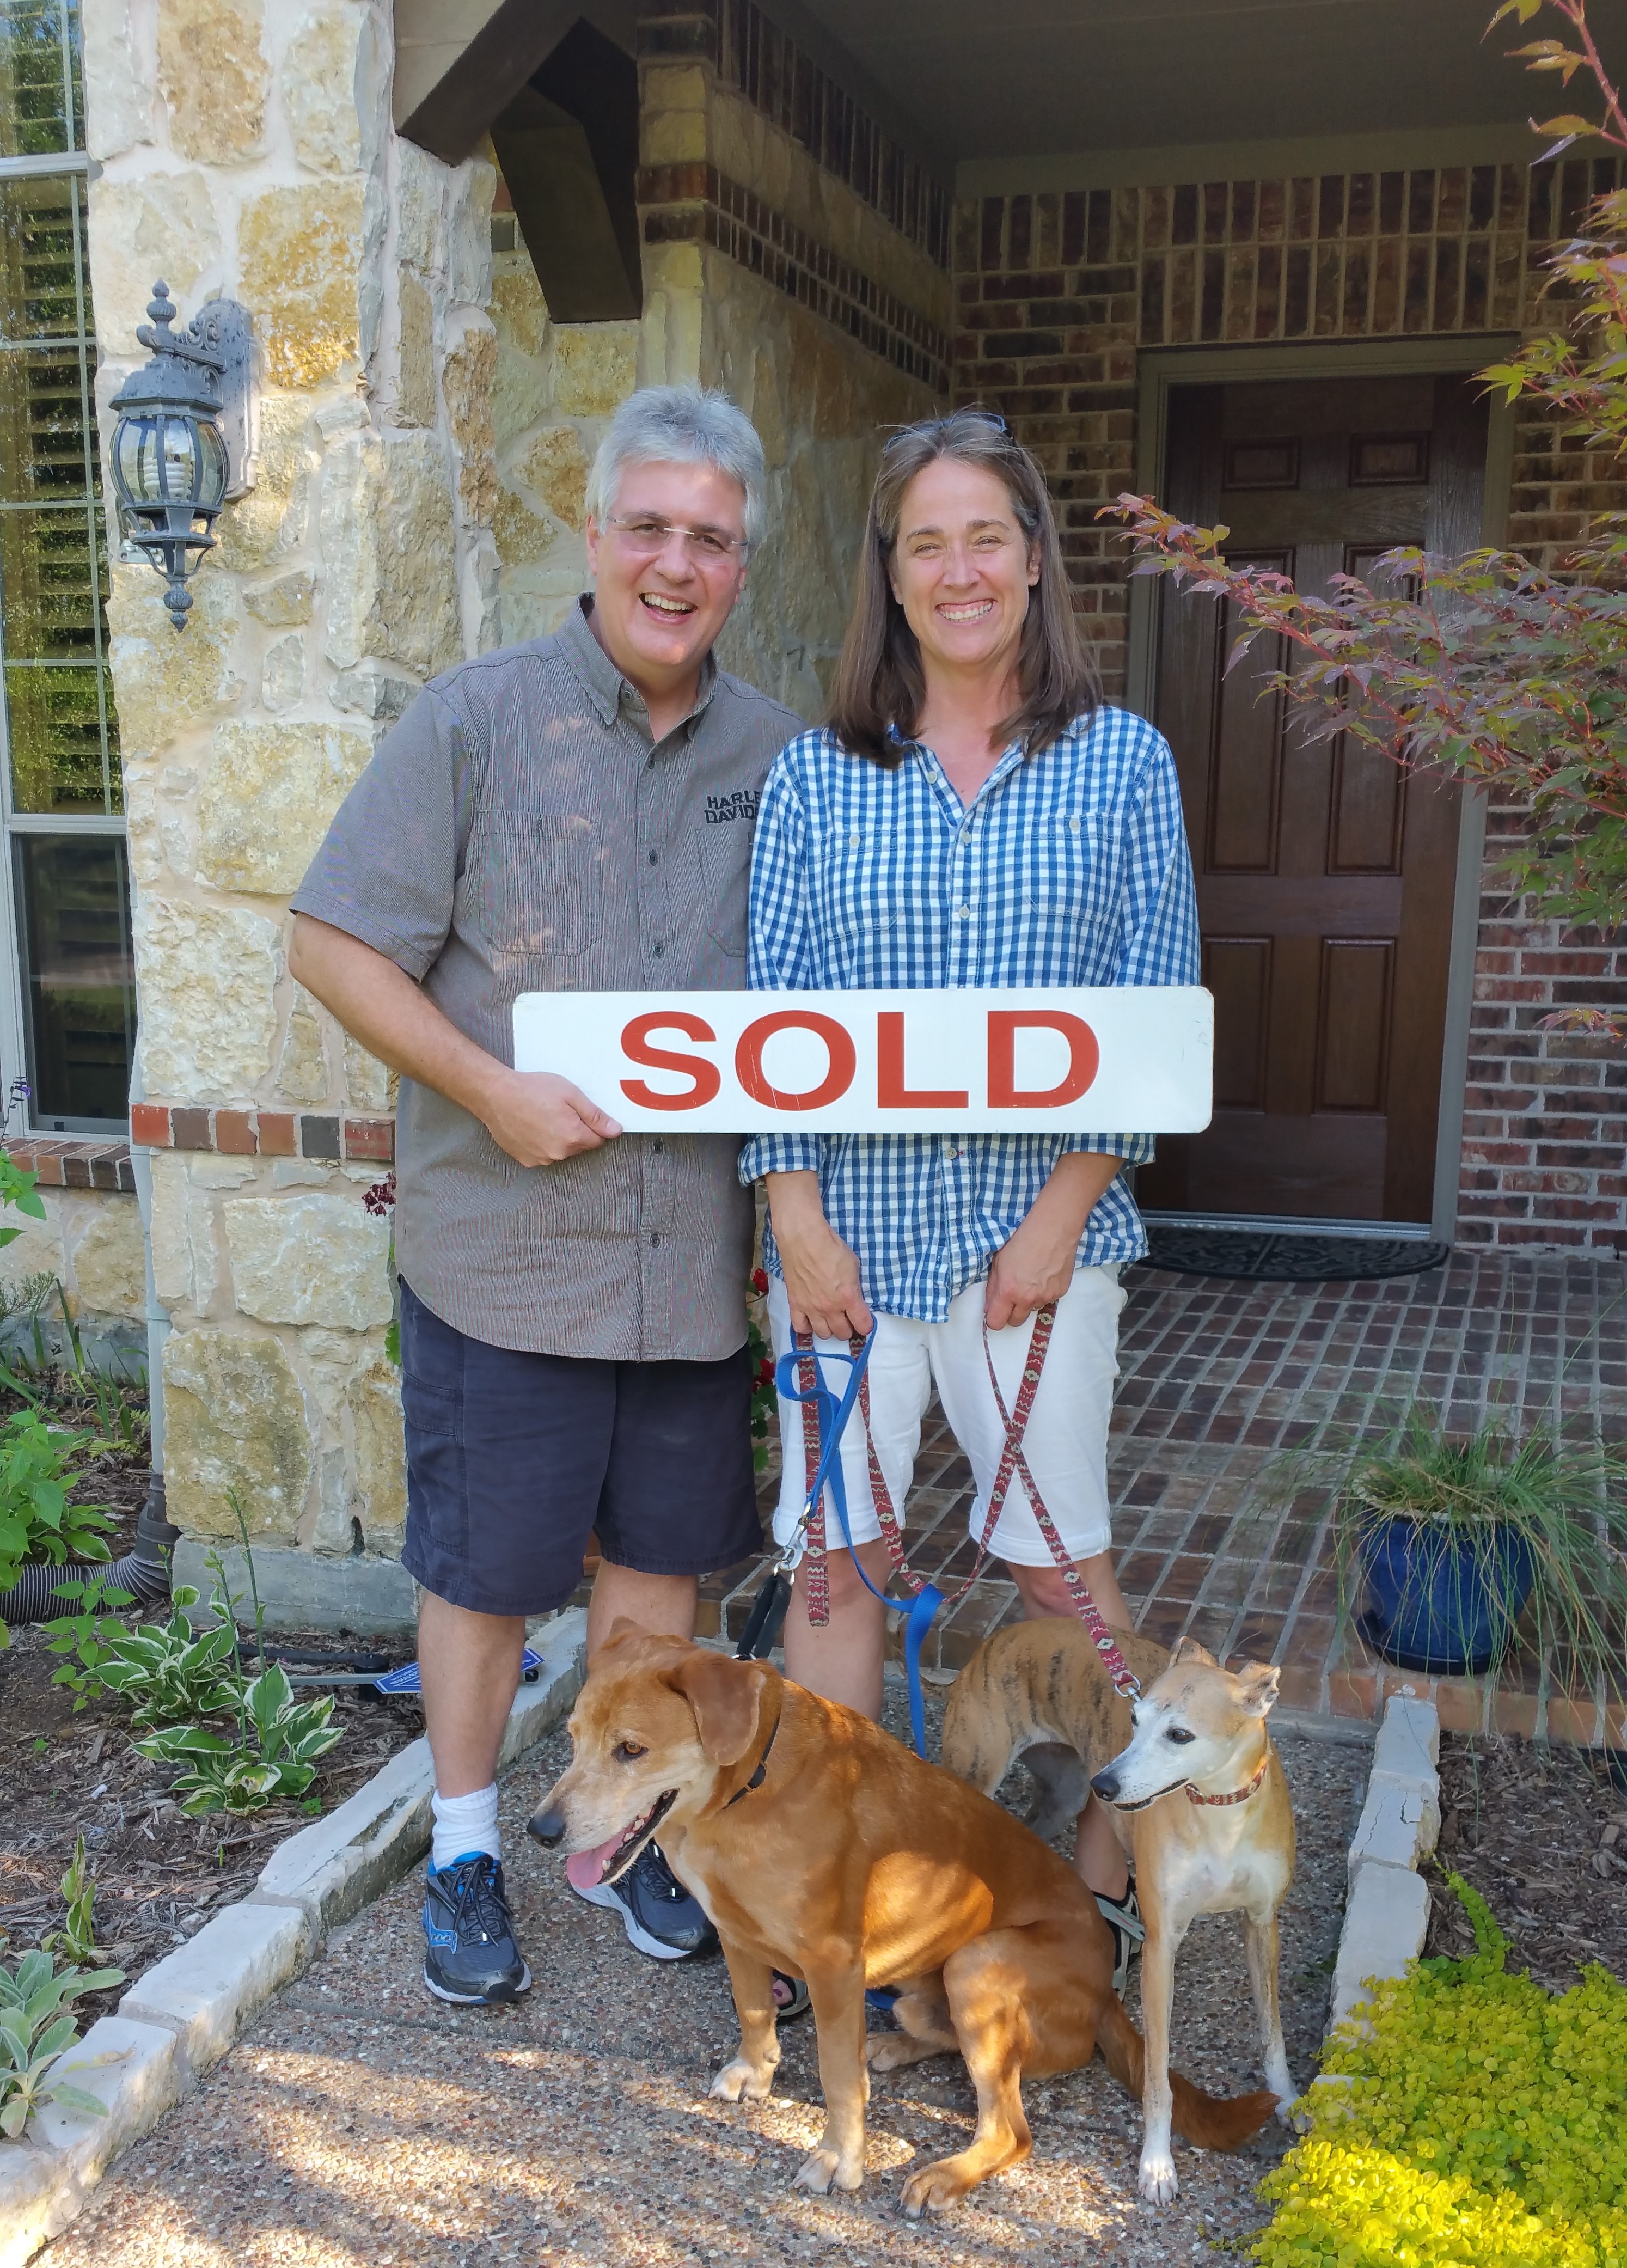 Pam did exactly what she promised, she sold our house!